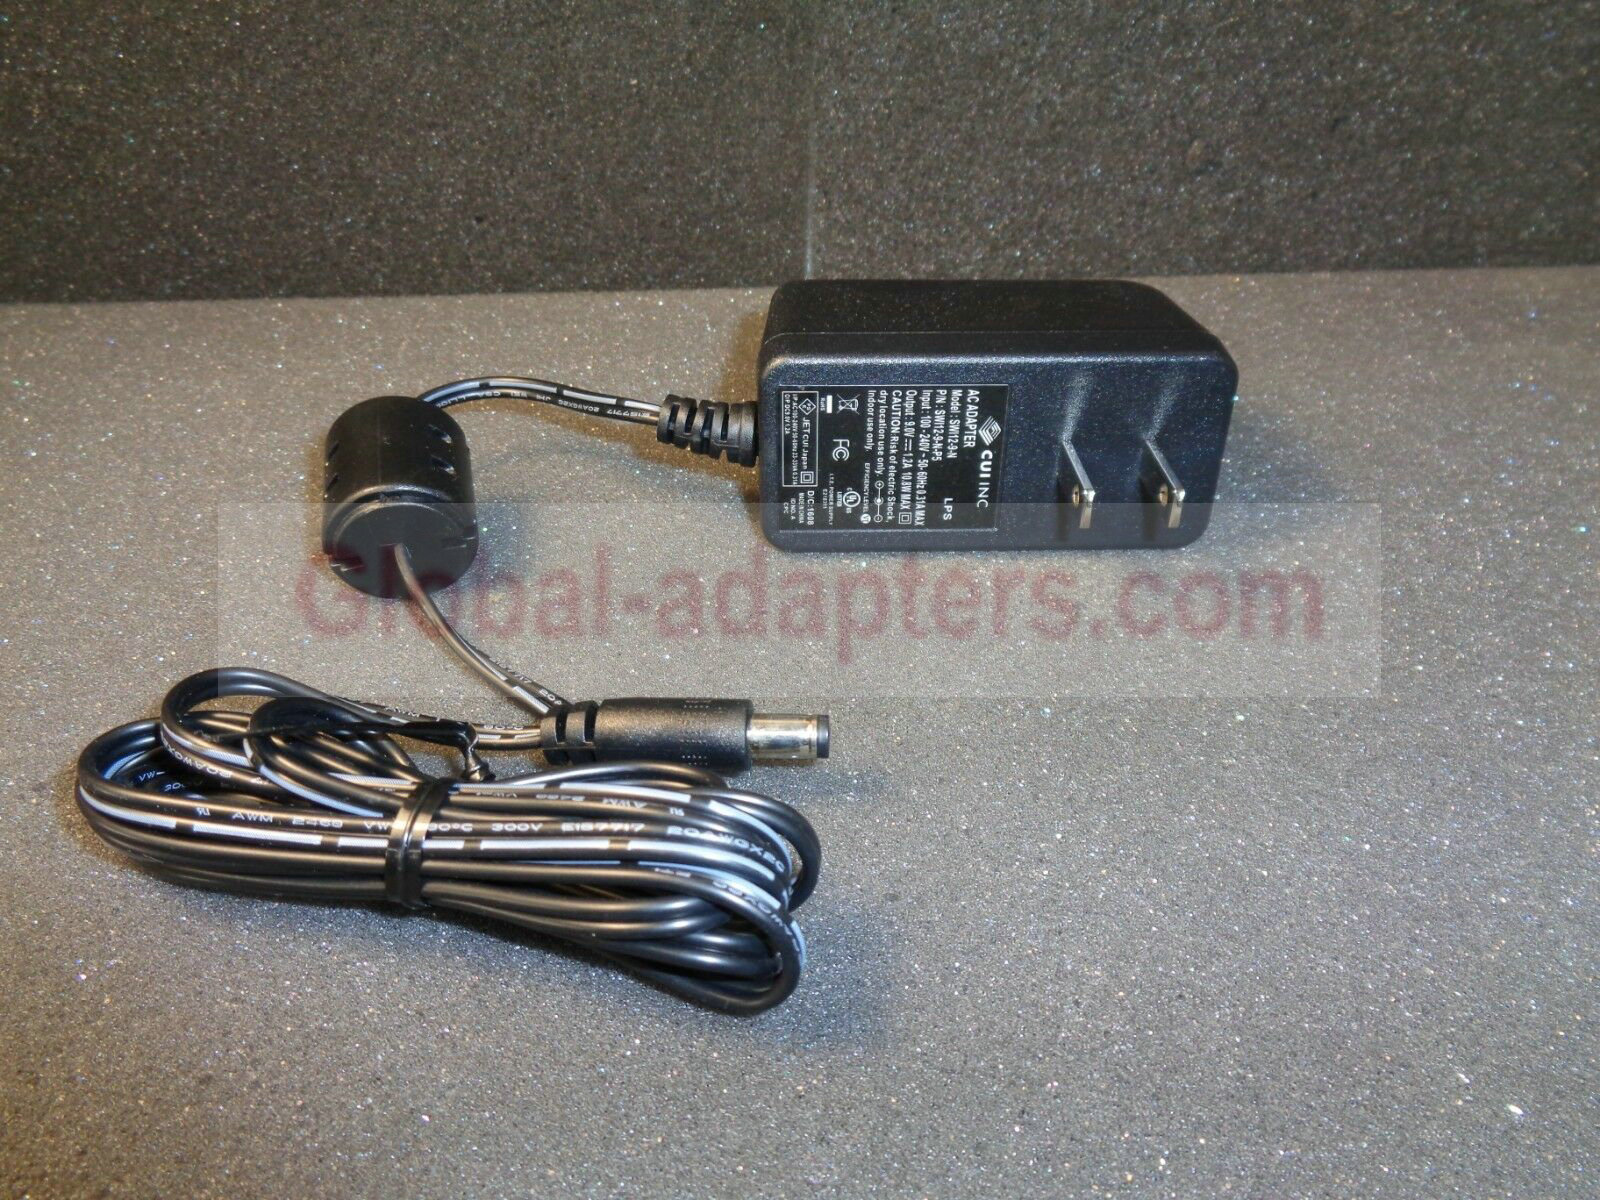 New 9V 1.2A CUI Inc. SWI12-9-N-P5 Power Supply AC ADAPTER - Click Image to Close